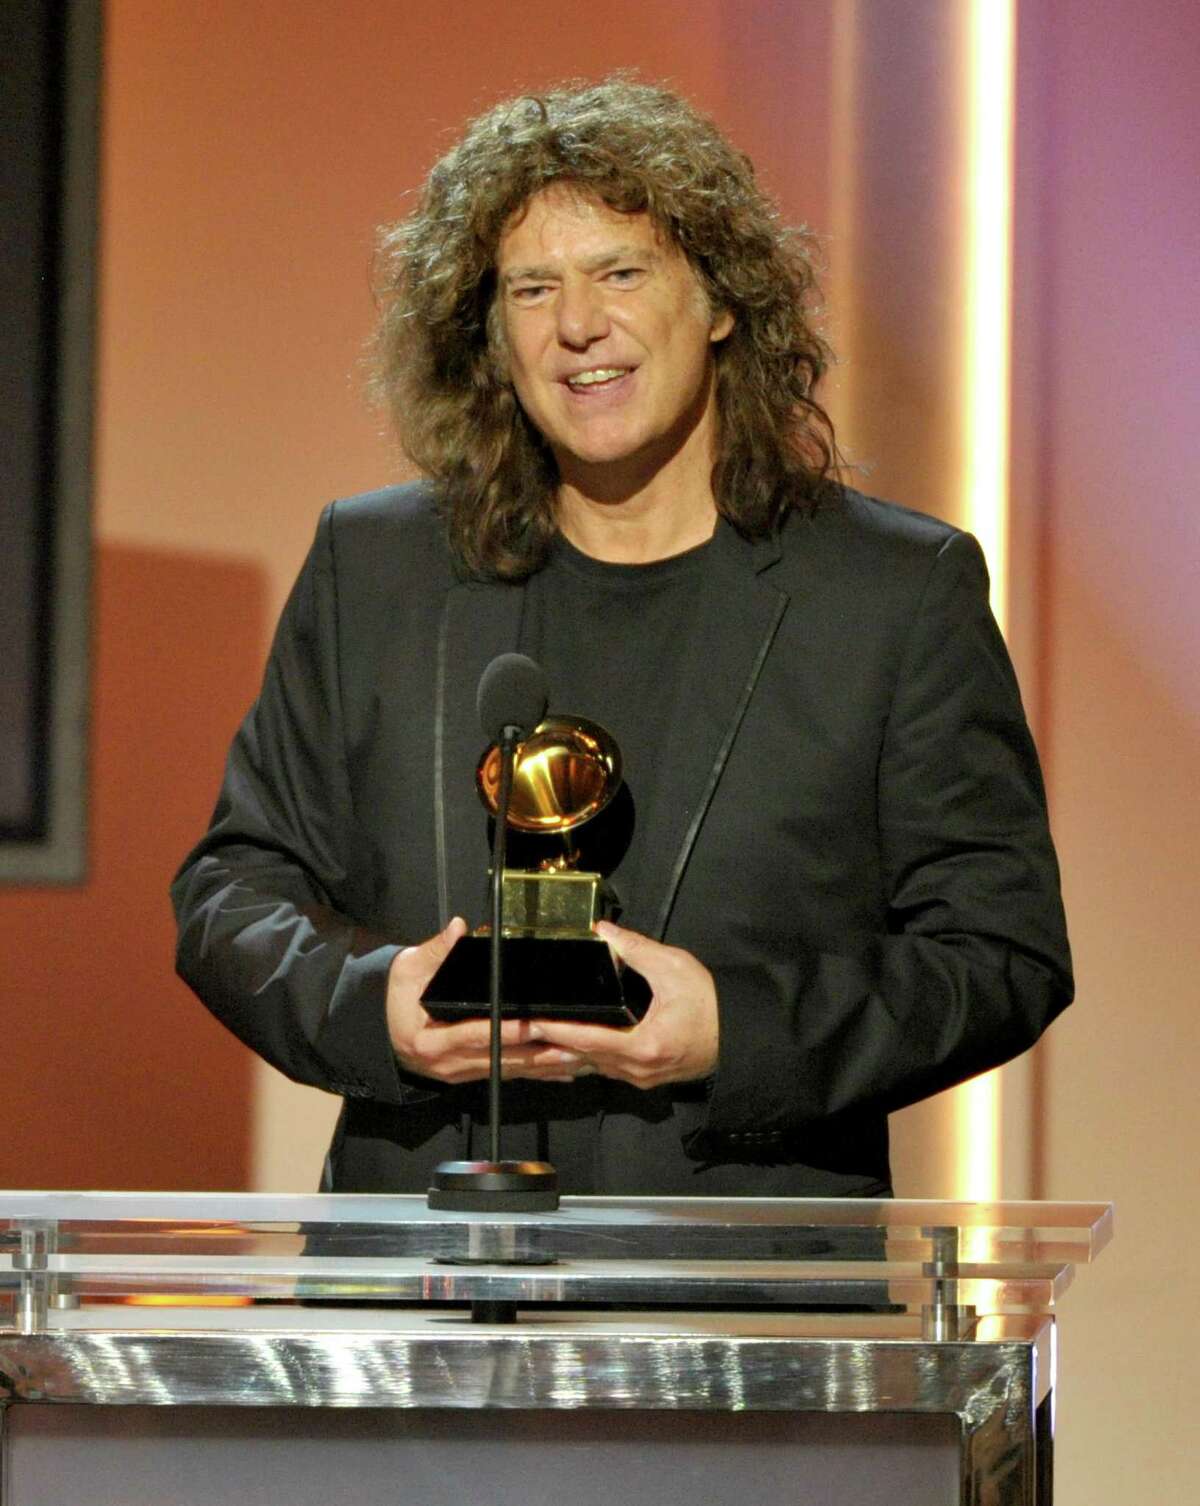 Pat Metheny accepts the jazz instrumental album award for "Unity Band" at the 55th annual Grammy Awards on Sunday, Feb. 10, 2013, in Los Angeles. (Photo by John Shearer/Invision/AP)